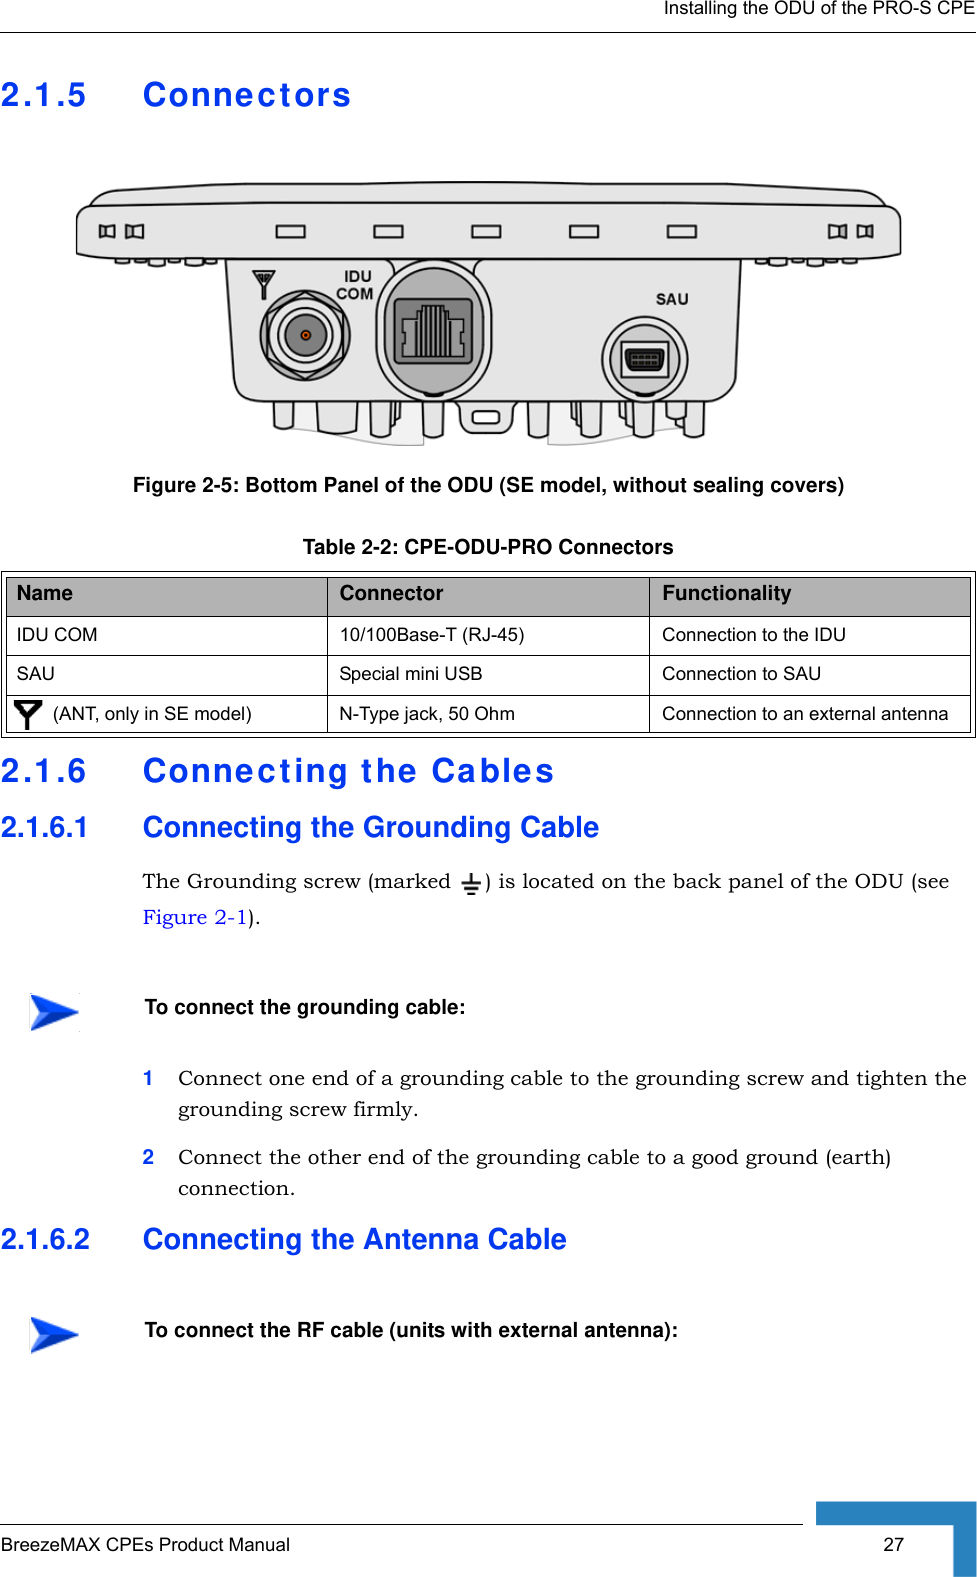 Installing the ODU of the PRO-S CPEBreezeMAX CPEs Product Manual  272.1.5 Connectors2.1.6 Connecting the Cables2.1.6.1 Connecting the Grounding CableThe Grounding screw (marked  ) is located on the back panel of the ODU (see Figure 2-1).1Connect one end of a grounding cable to the grounding screw and tighten the grounding screw firmly. 2Connect the other end of the grounding cable to a good ground (earth) connection.2.1.6.2 Connecting the Antenna CableFigure 2-5: Bottom Panel of the ODU (SE model, without sealing covers)Table 2-2: CPE-ODU-PRO ConnectorsName Connector FunctionalityIDU COM 10/100Base-T (RJ-45) Connection to the IDUSAU Special mini USB Connection to SAU       (ANT, only in SE model) N-Type jack, 50 Ohm Connection to an external antennaTo connect the grounding cable:To connect the RF cable (units with external antenna):